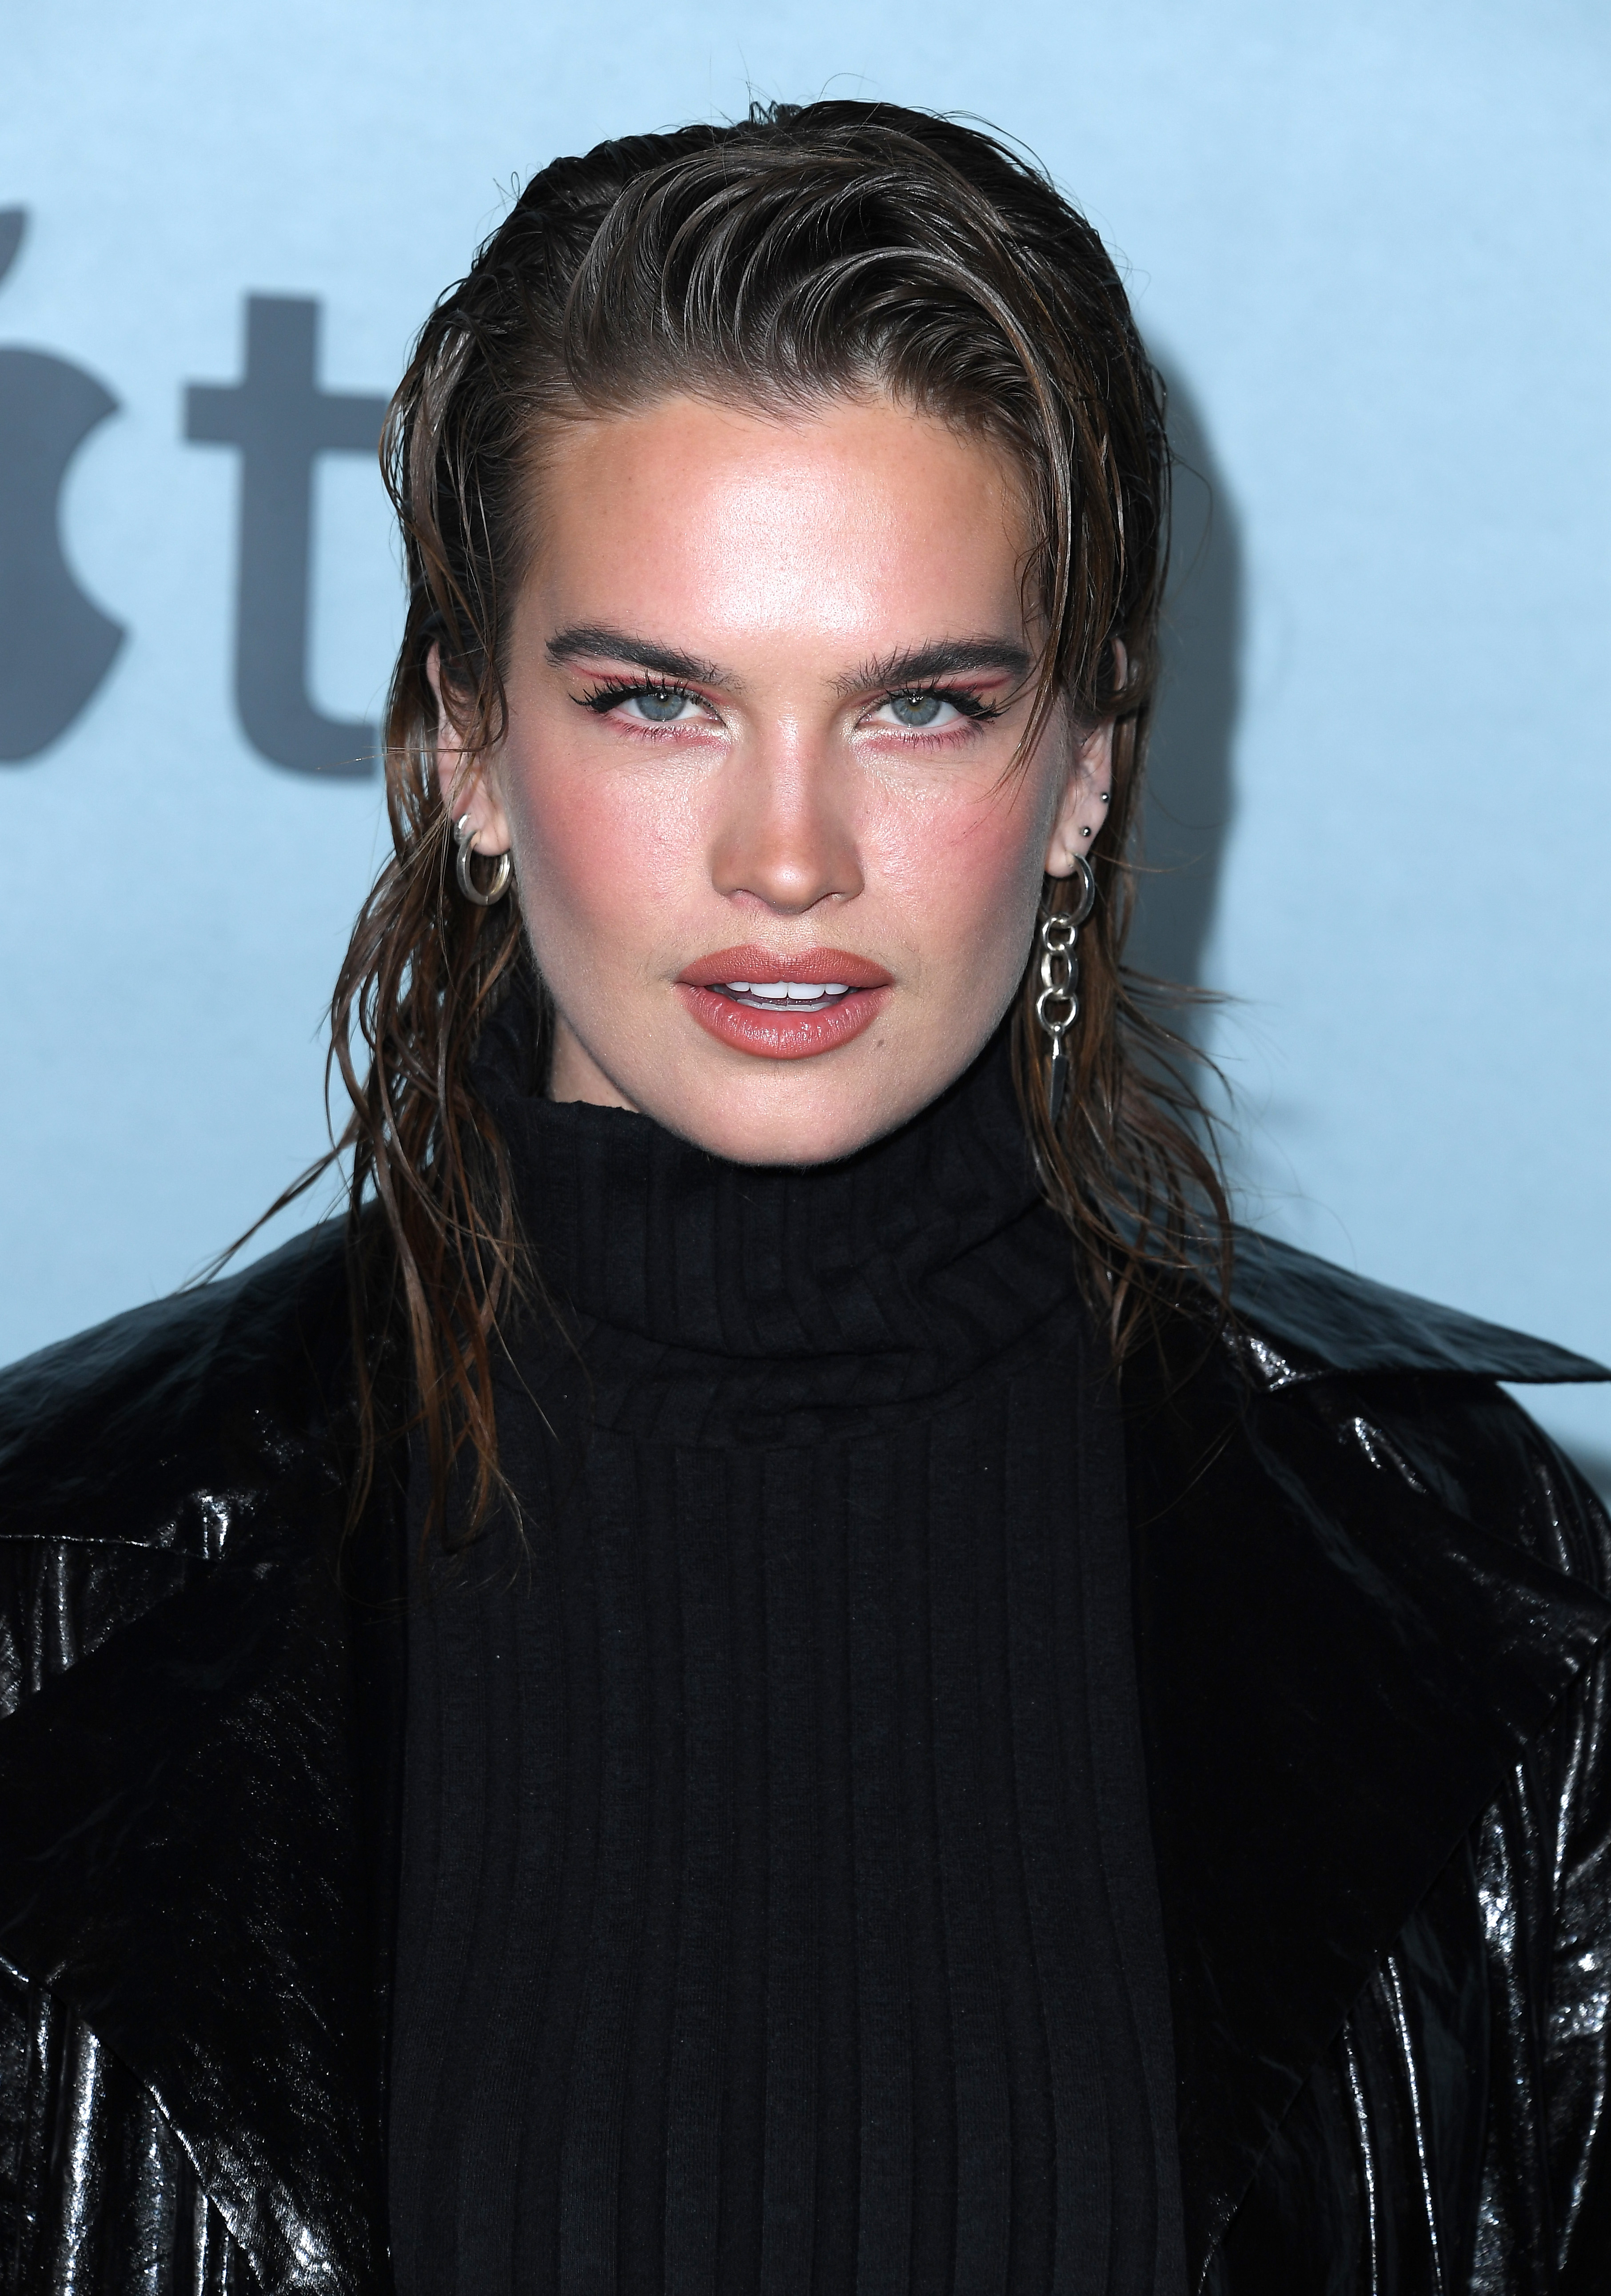 Close-up of a Stormi wearing a turtleneck and shiny jacket, with slicked-back hair and hoop earrings